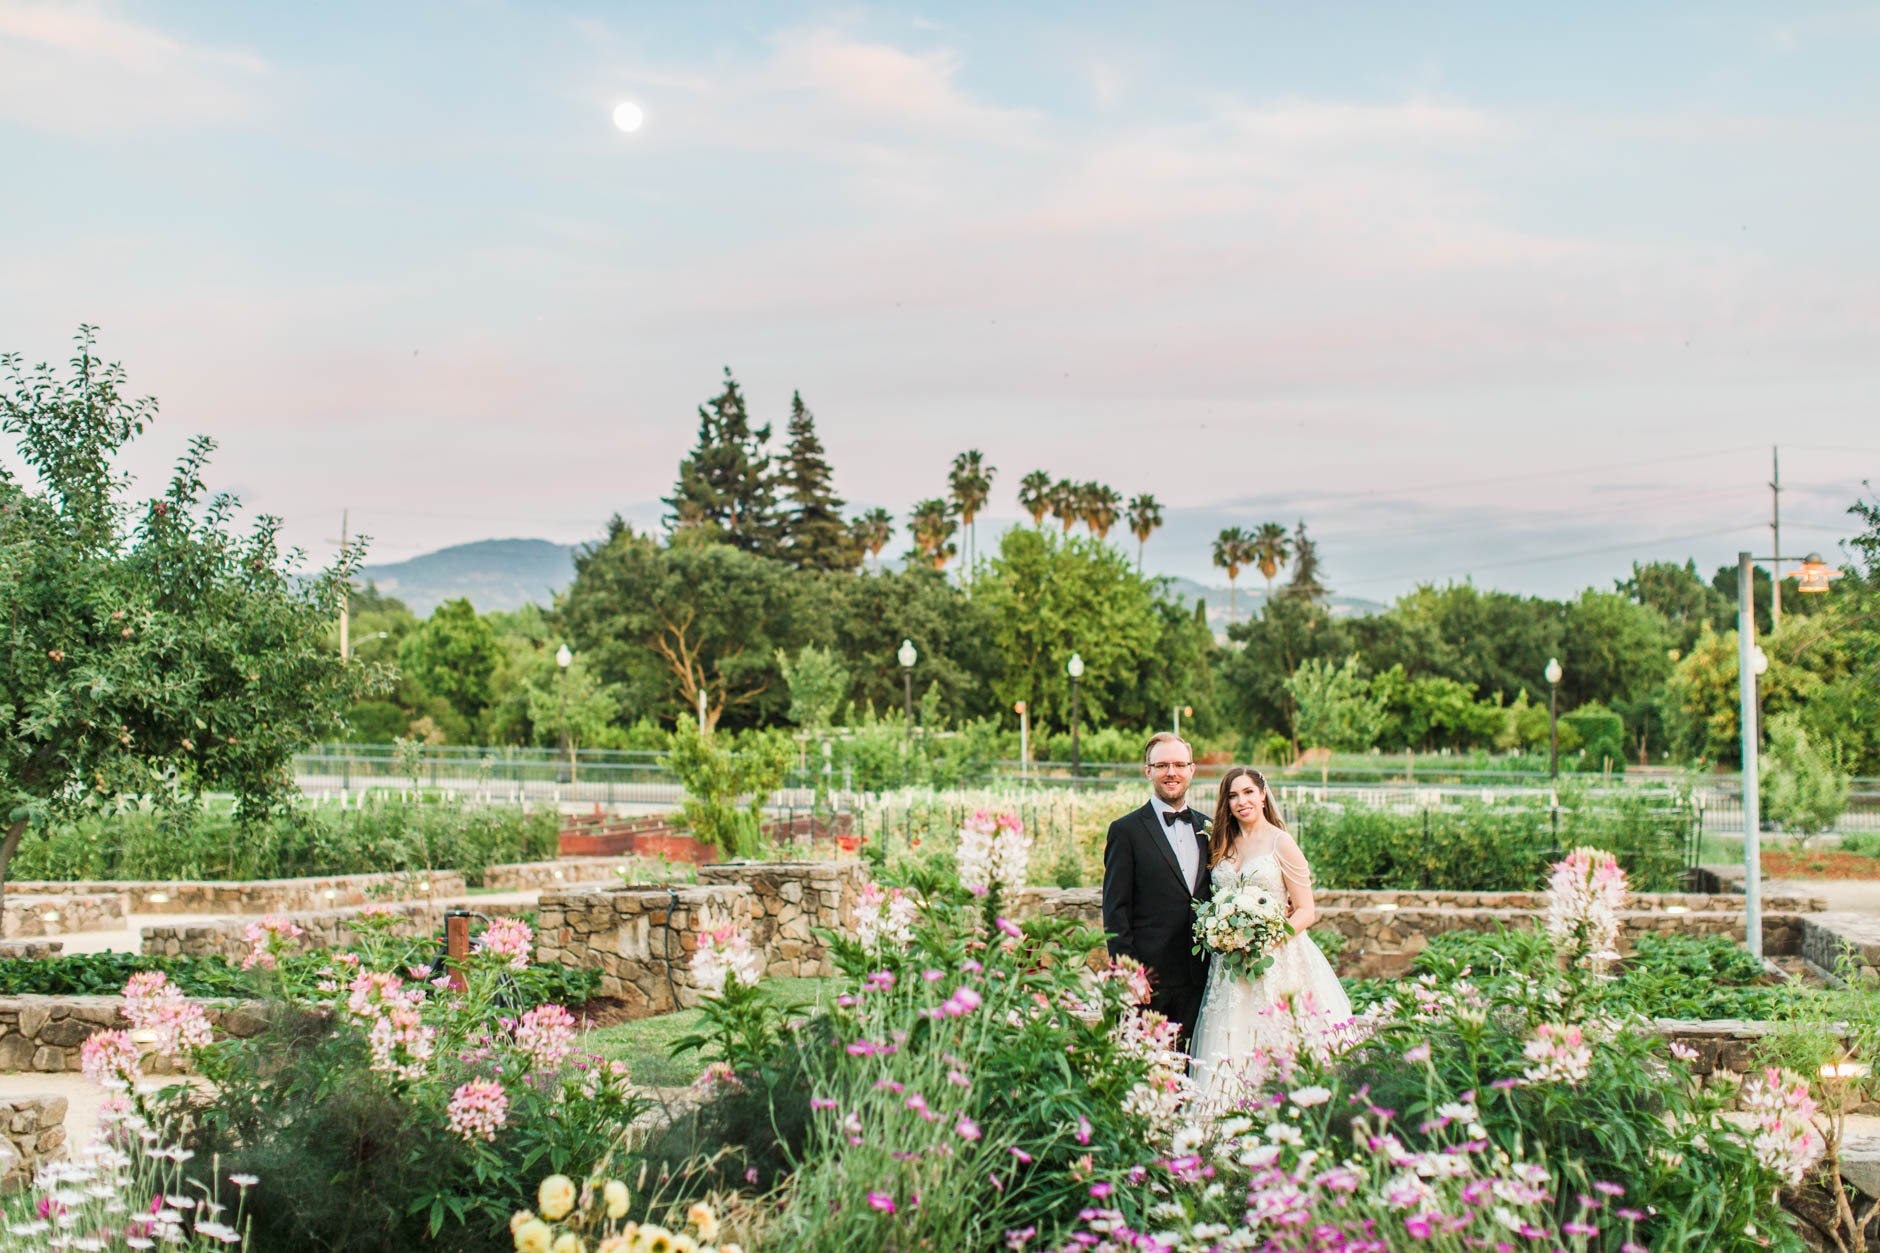 Bride and groom under the moon at sunset in CIA Copia garden